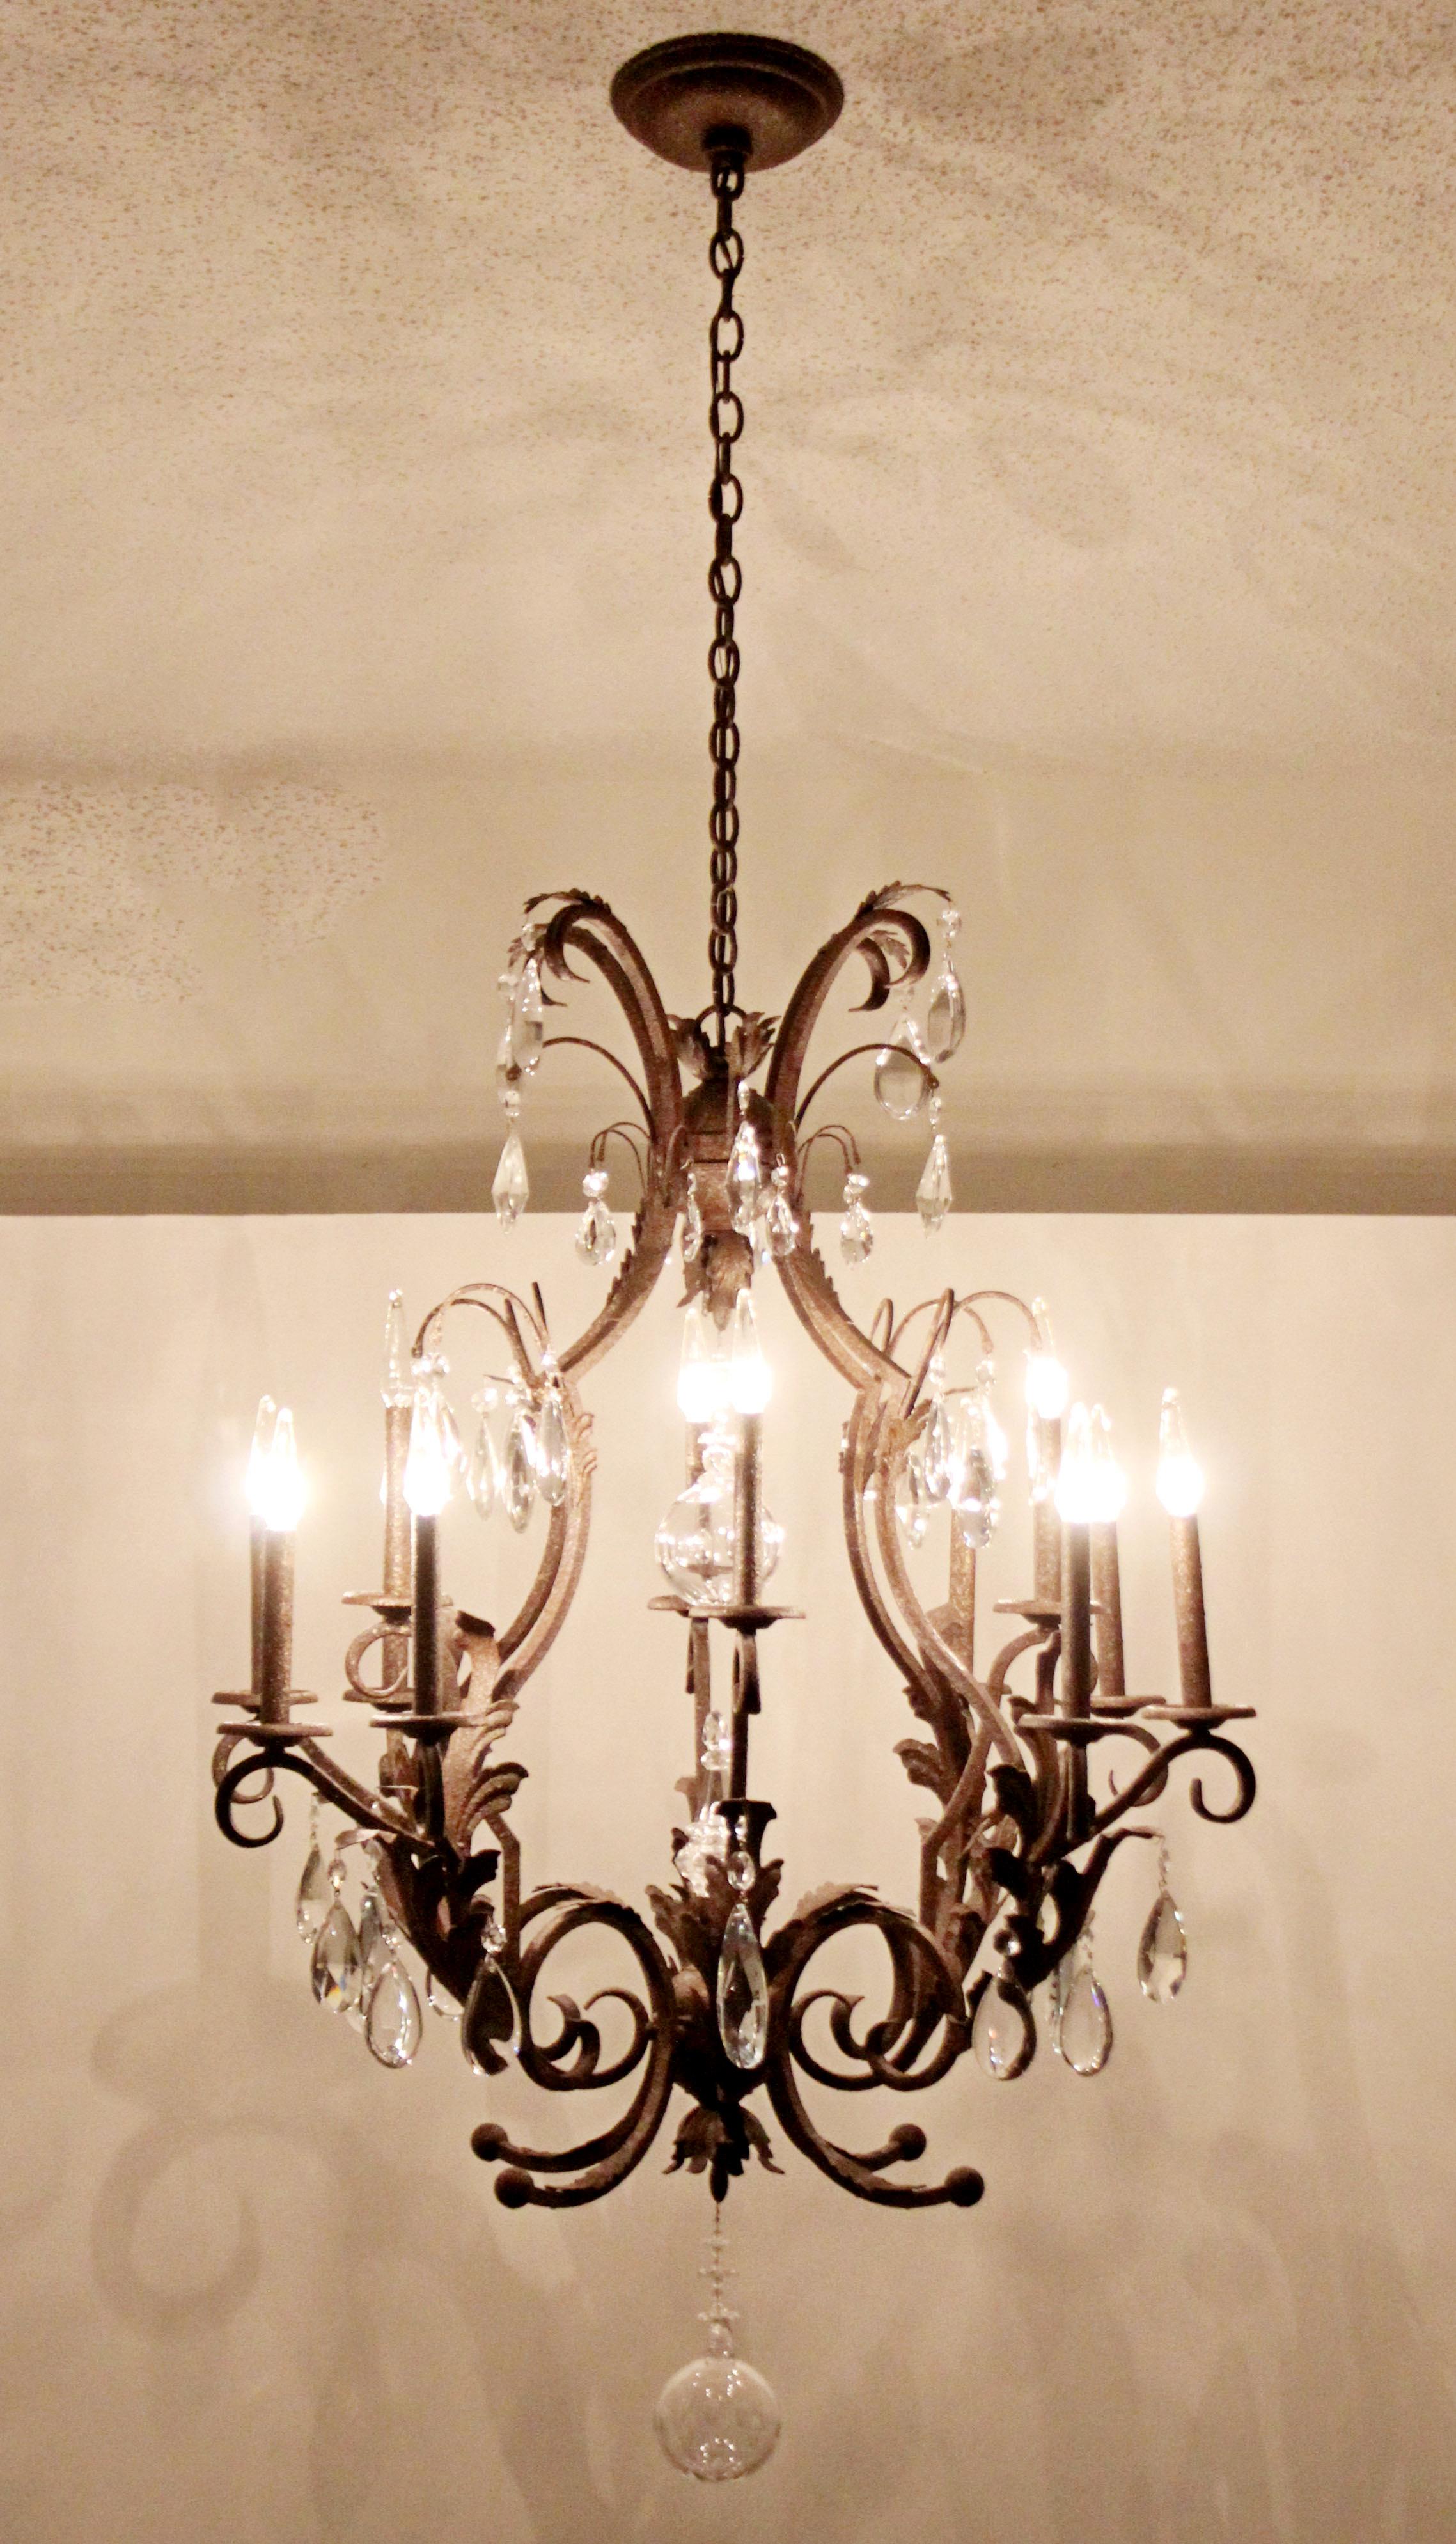 For your consideration is a massive chandelier, with eleven arms. In excellent condition. The dimensions are 73